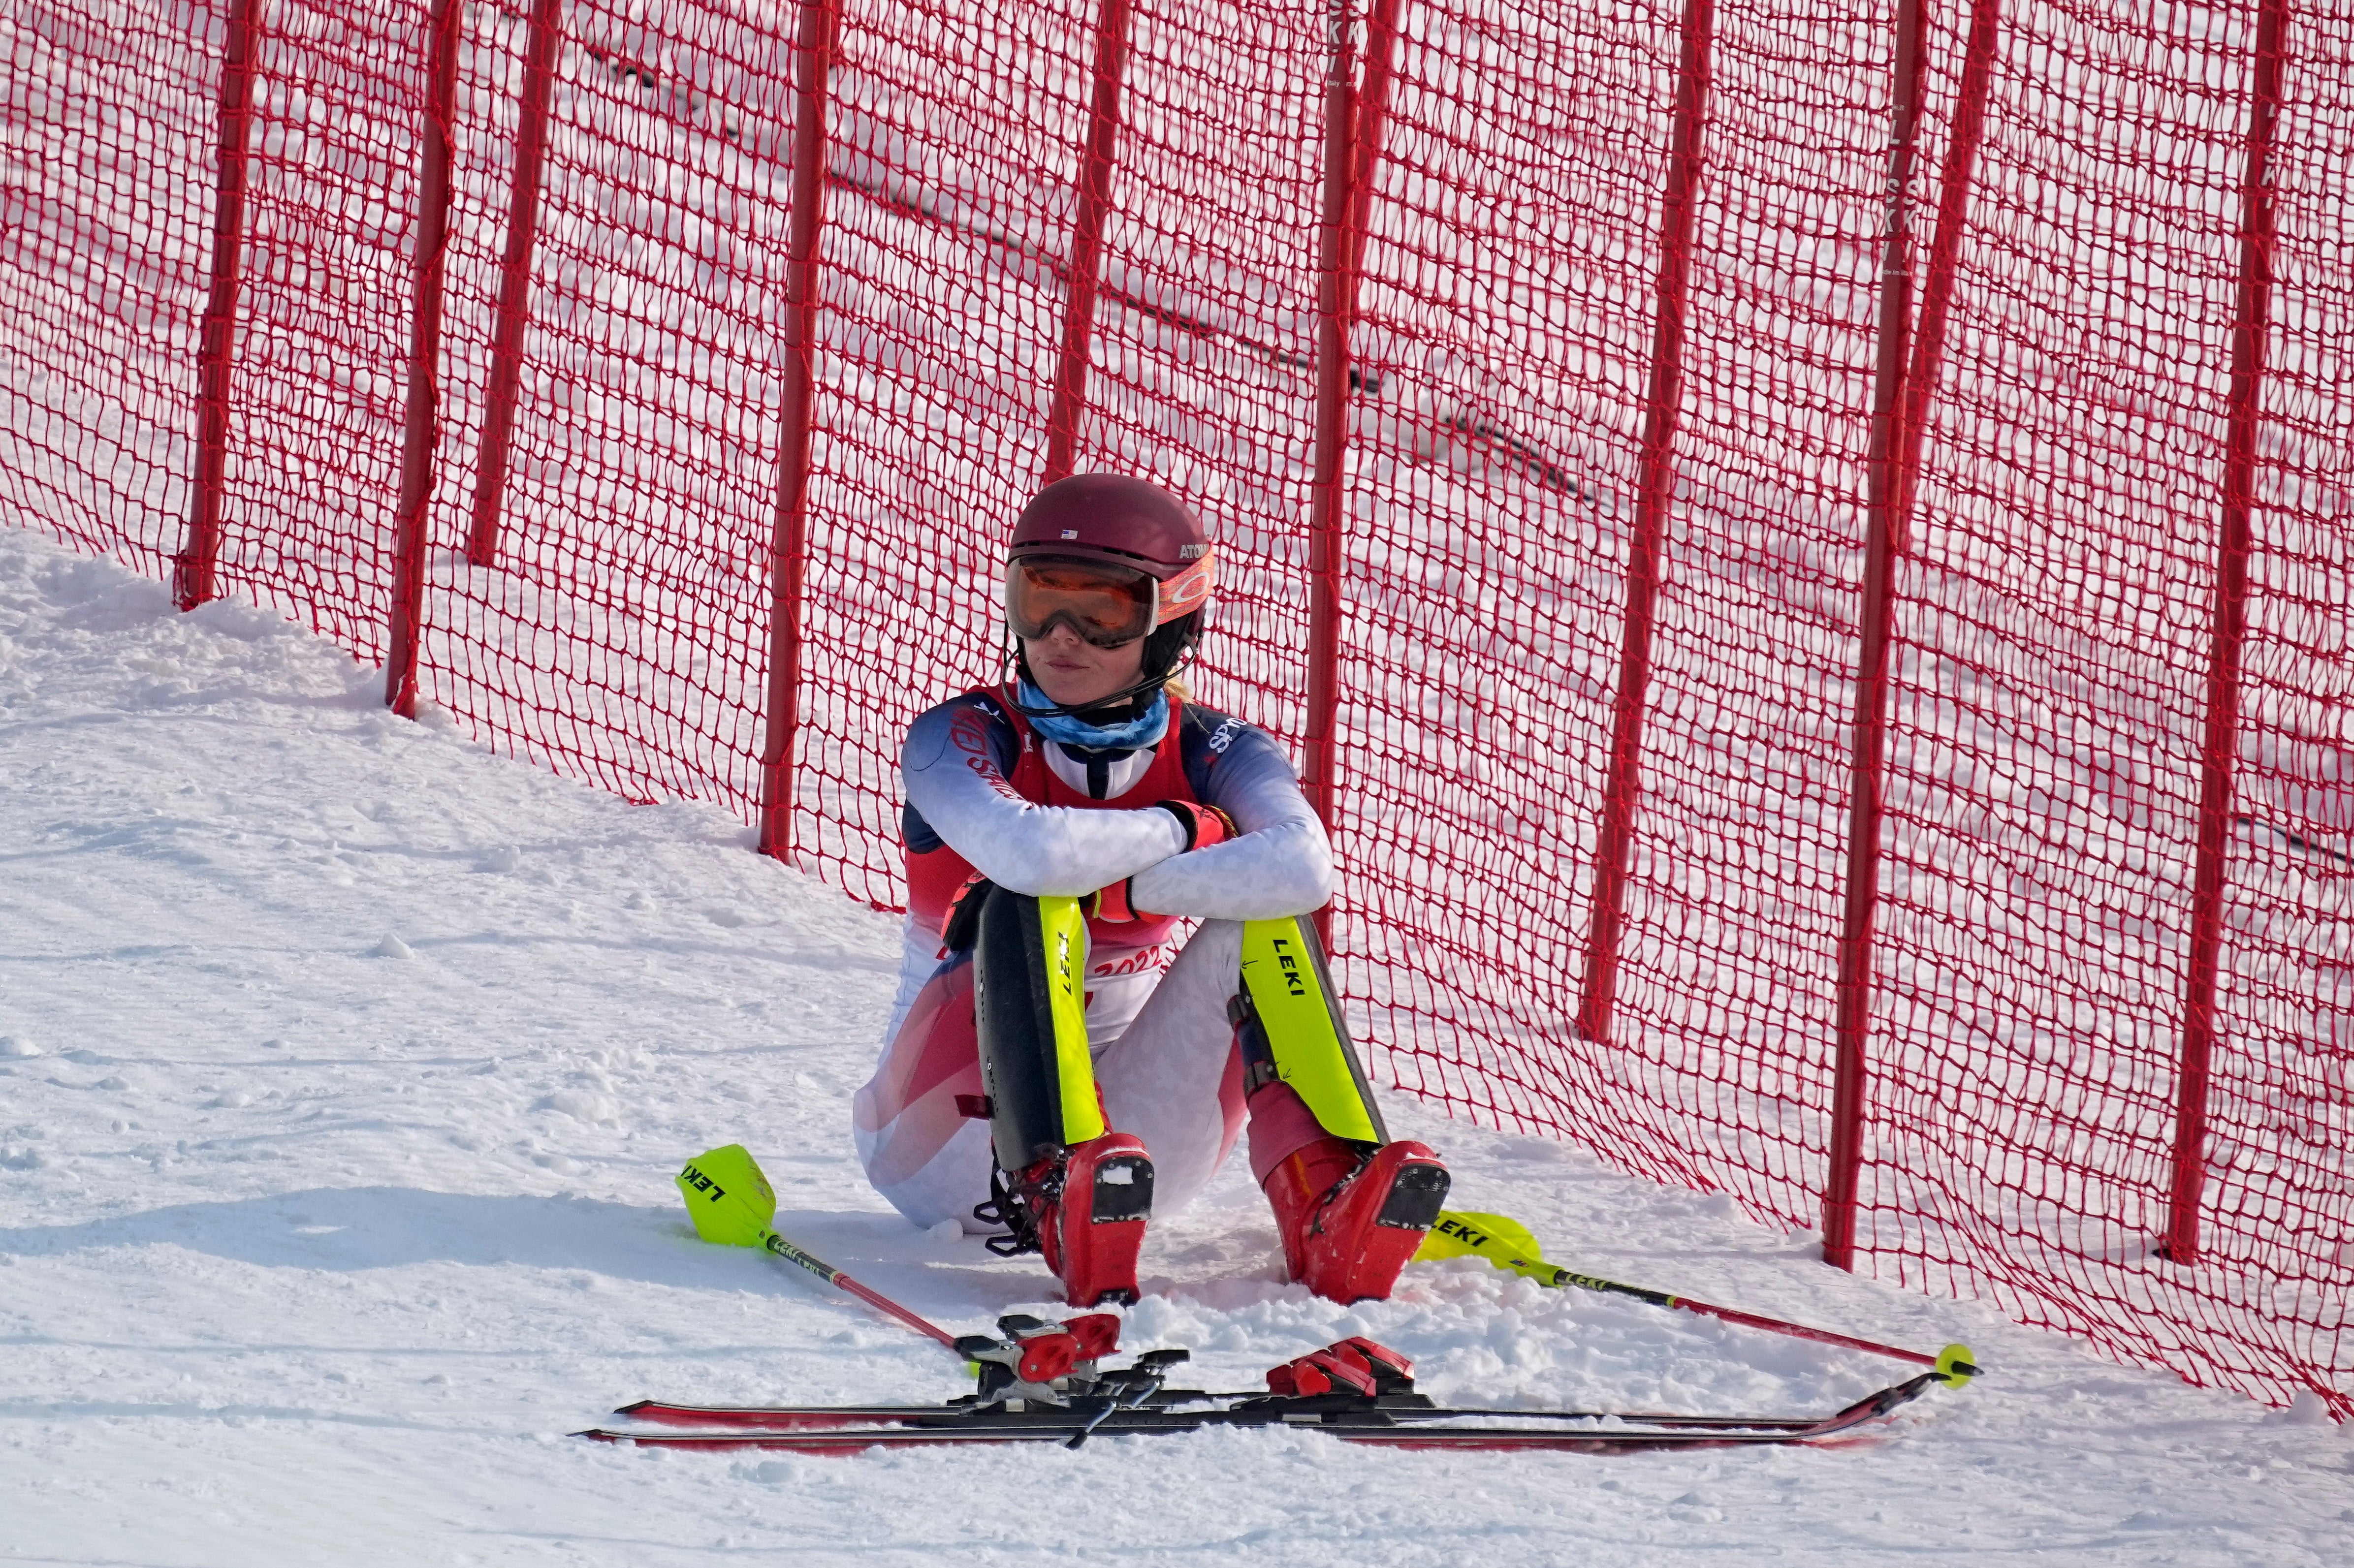 Mikaela Shiffrin said she was unsure if she would continue after her latest setback in Beijing (Robert F. Bukaty/AP)